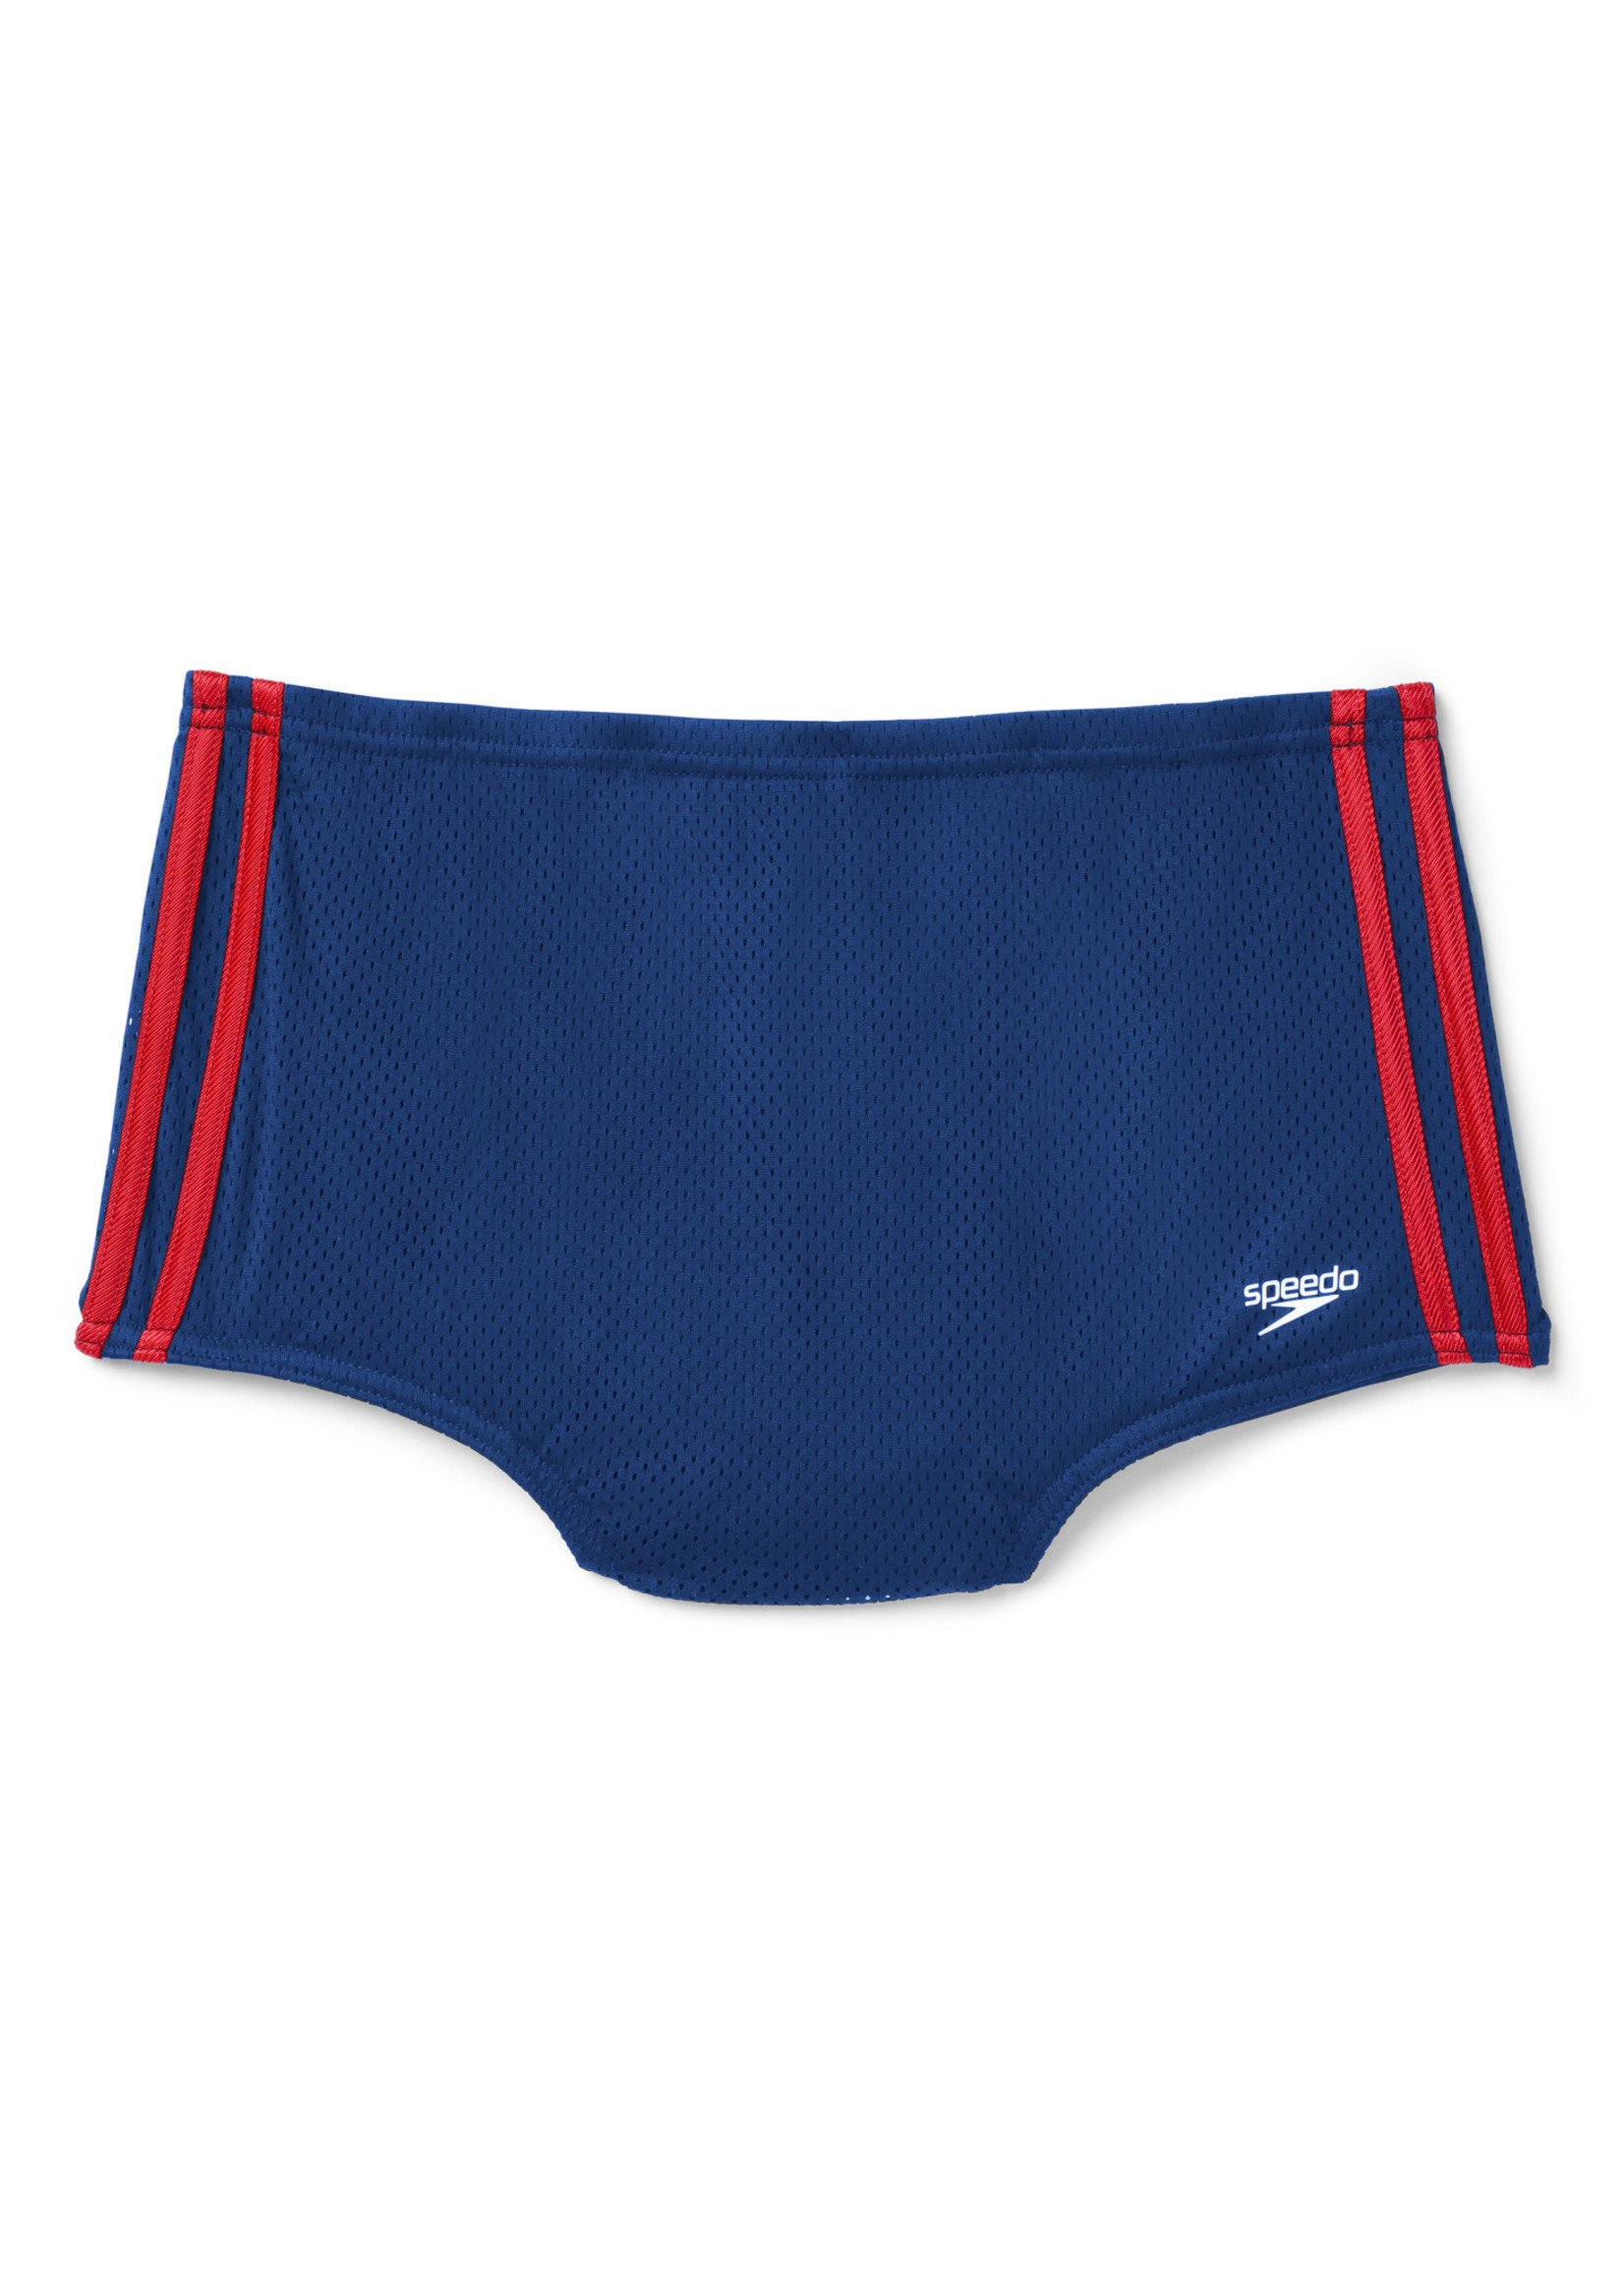 Poly Mesh Square Leg Training Suit 411 Navy/Red